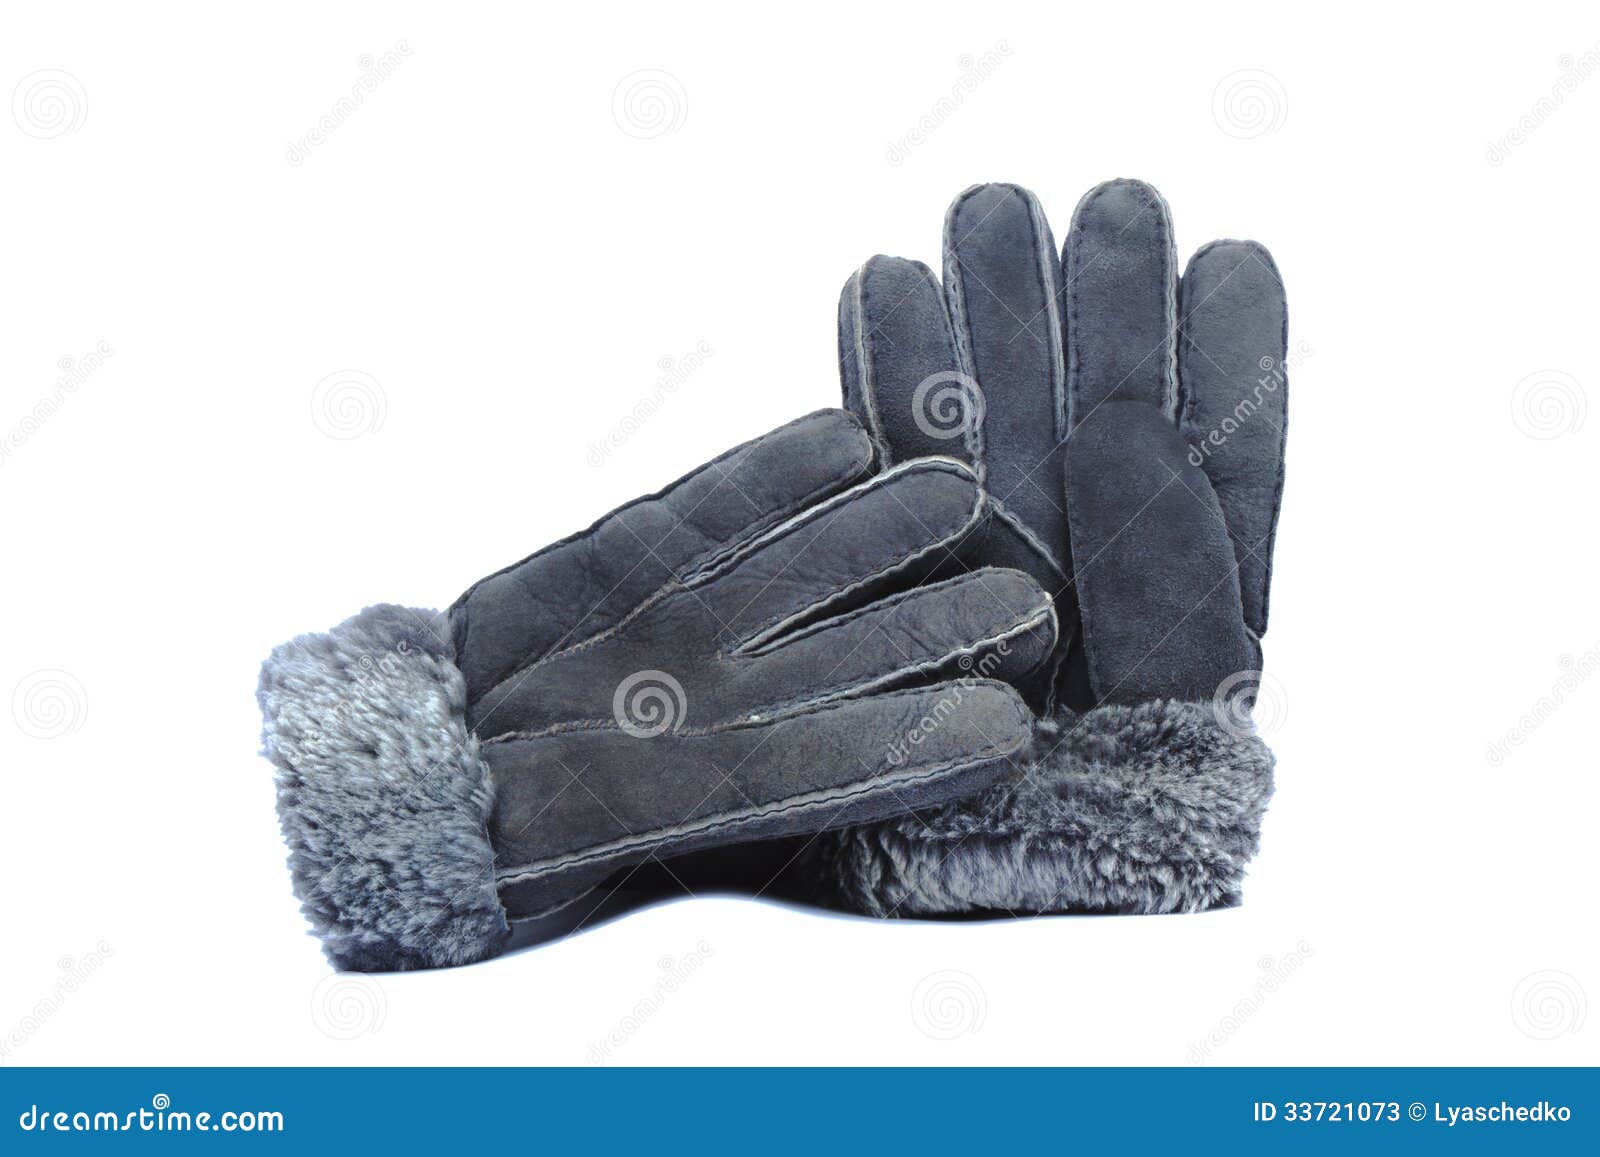 Fur Winter Gloves Grey Colors On The White Background. Stock Image - Image of subject ...